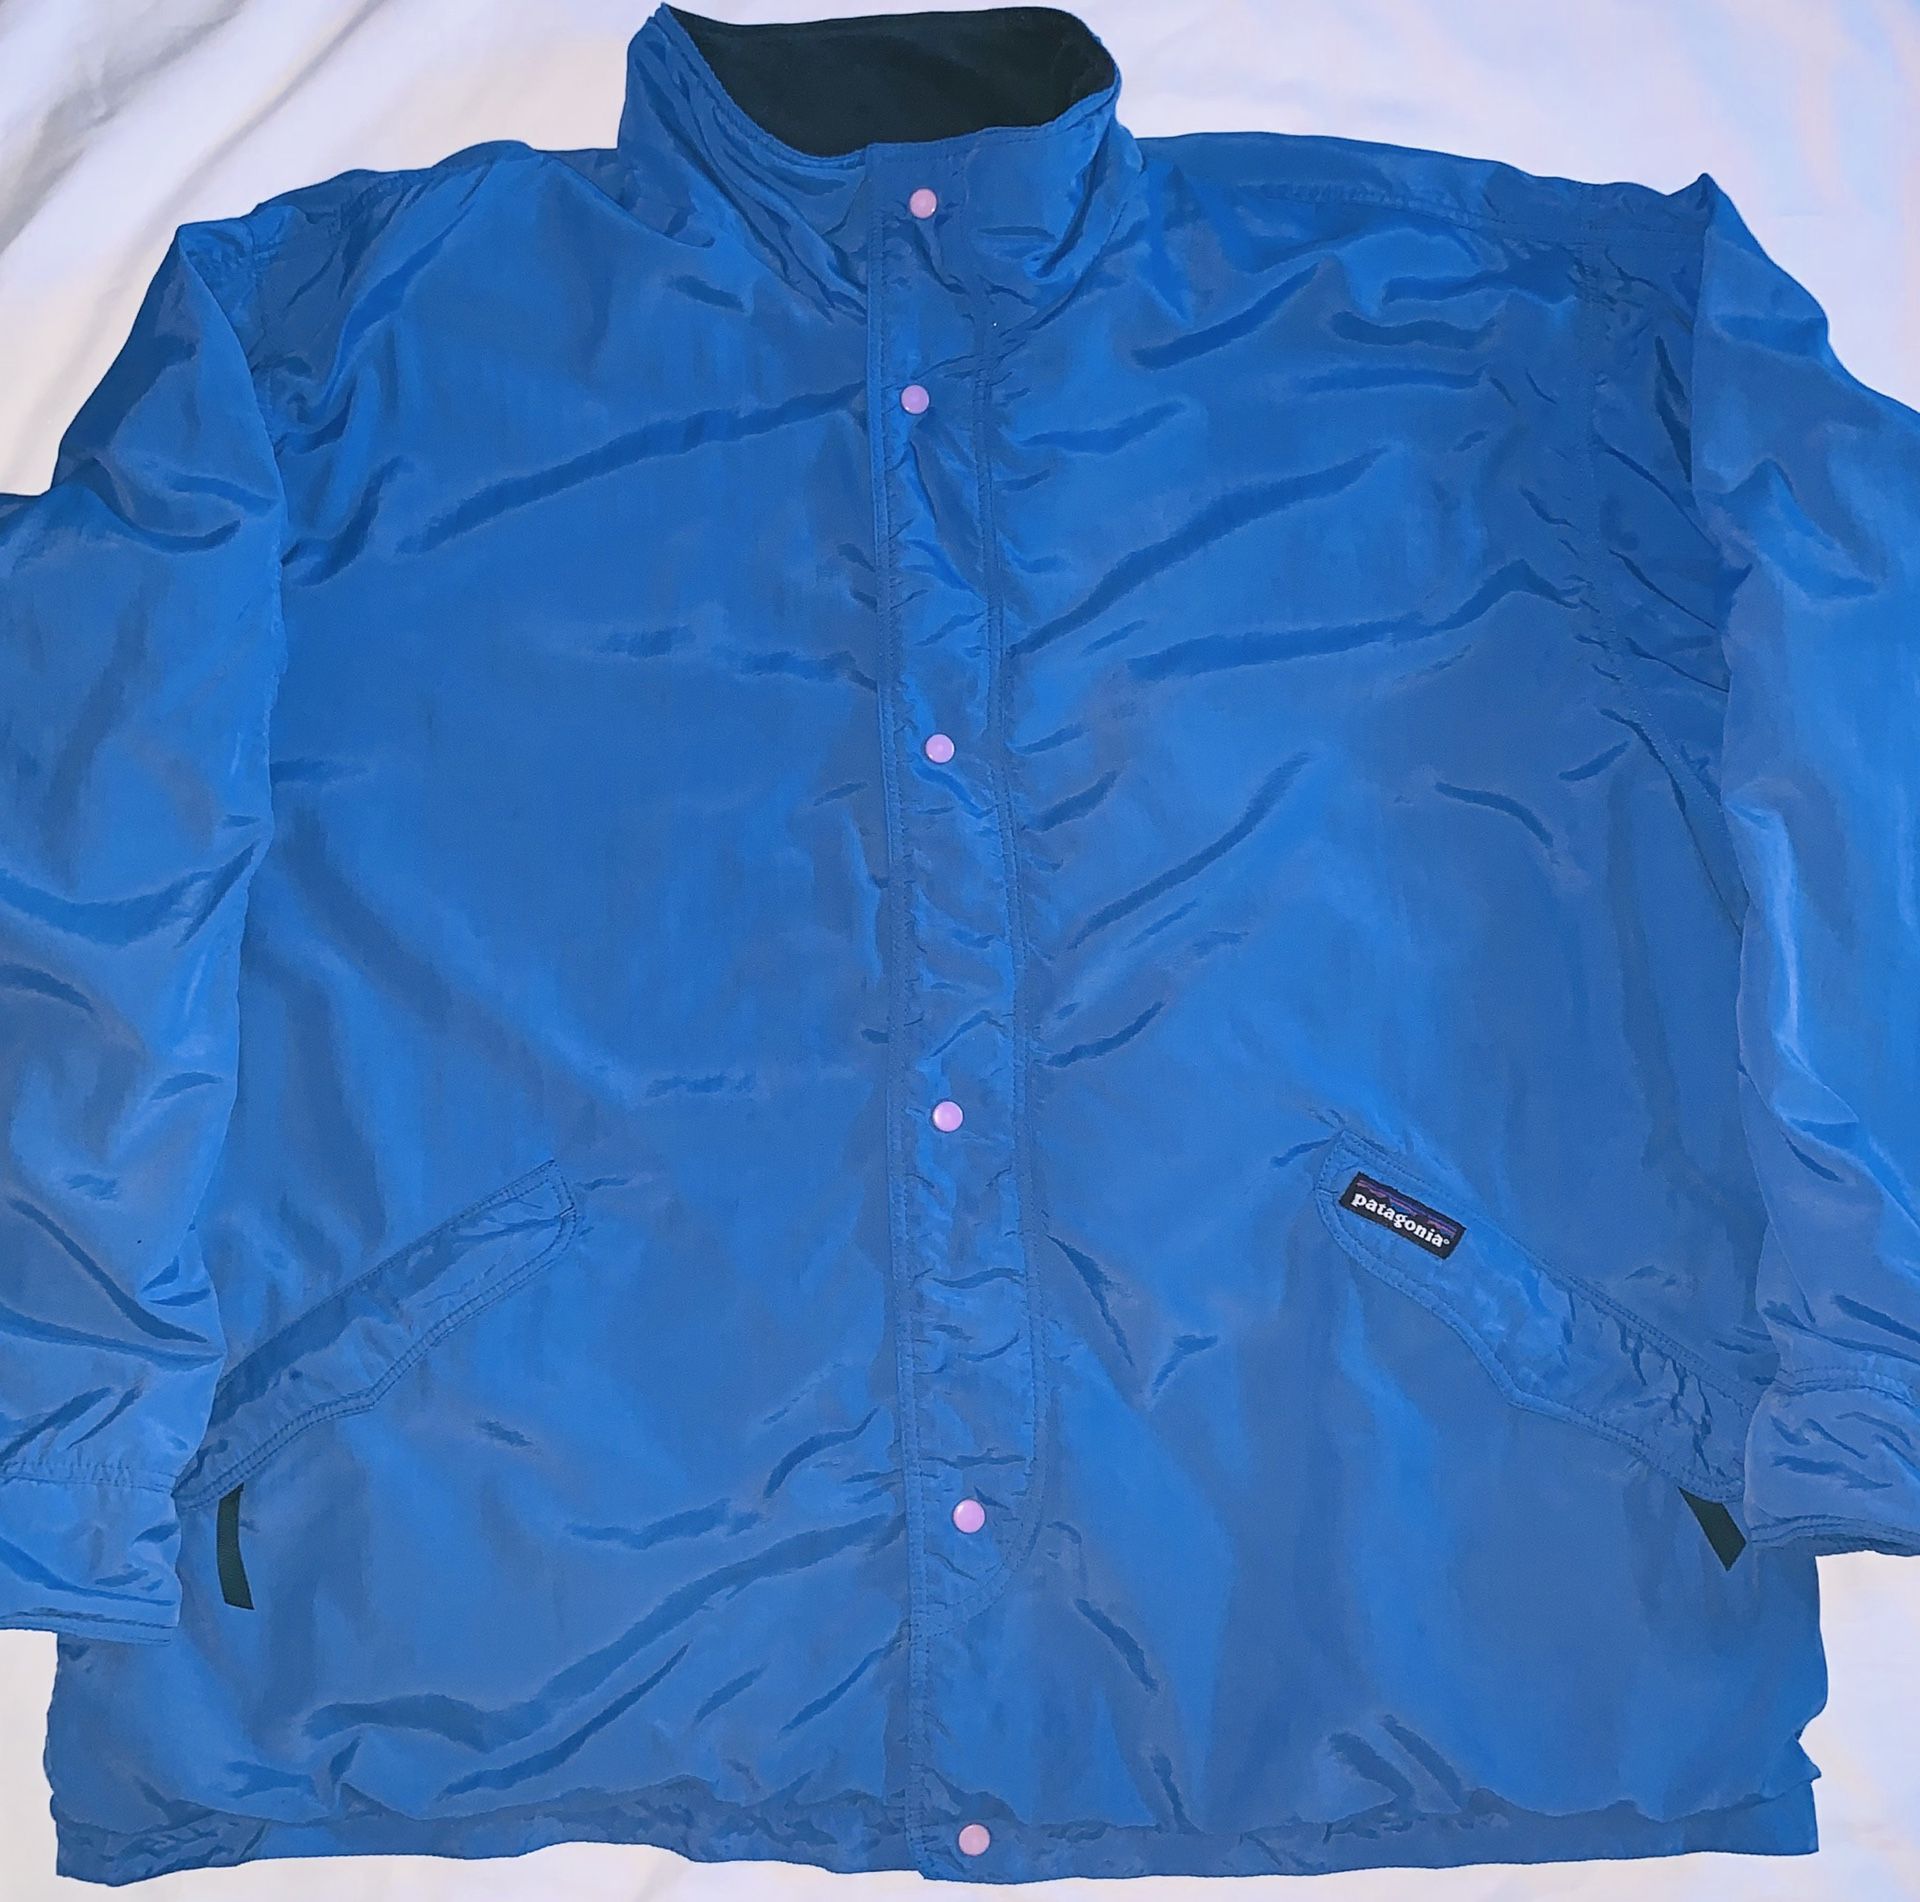 Vintage Patagonia Made In USA Blue Jacket Mens XLarge 90s Fleece Lined Overcoat